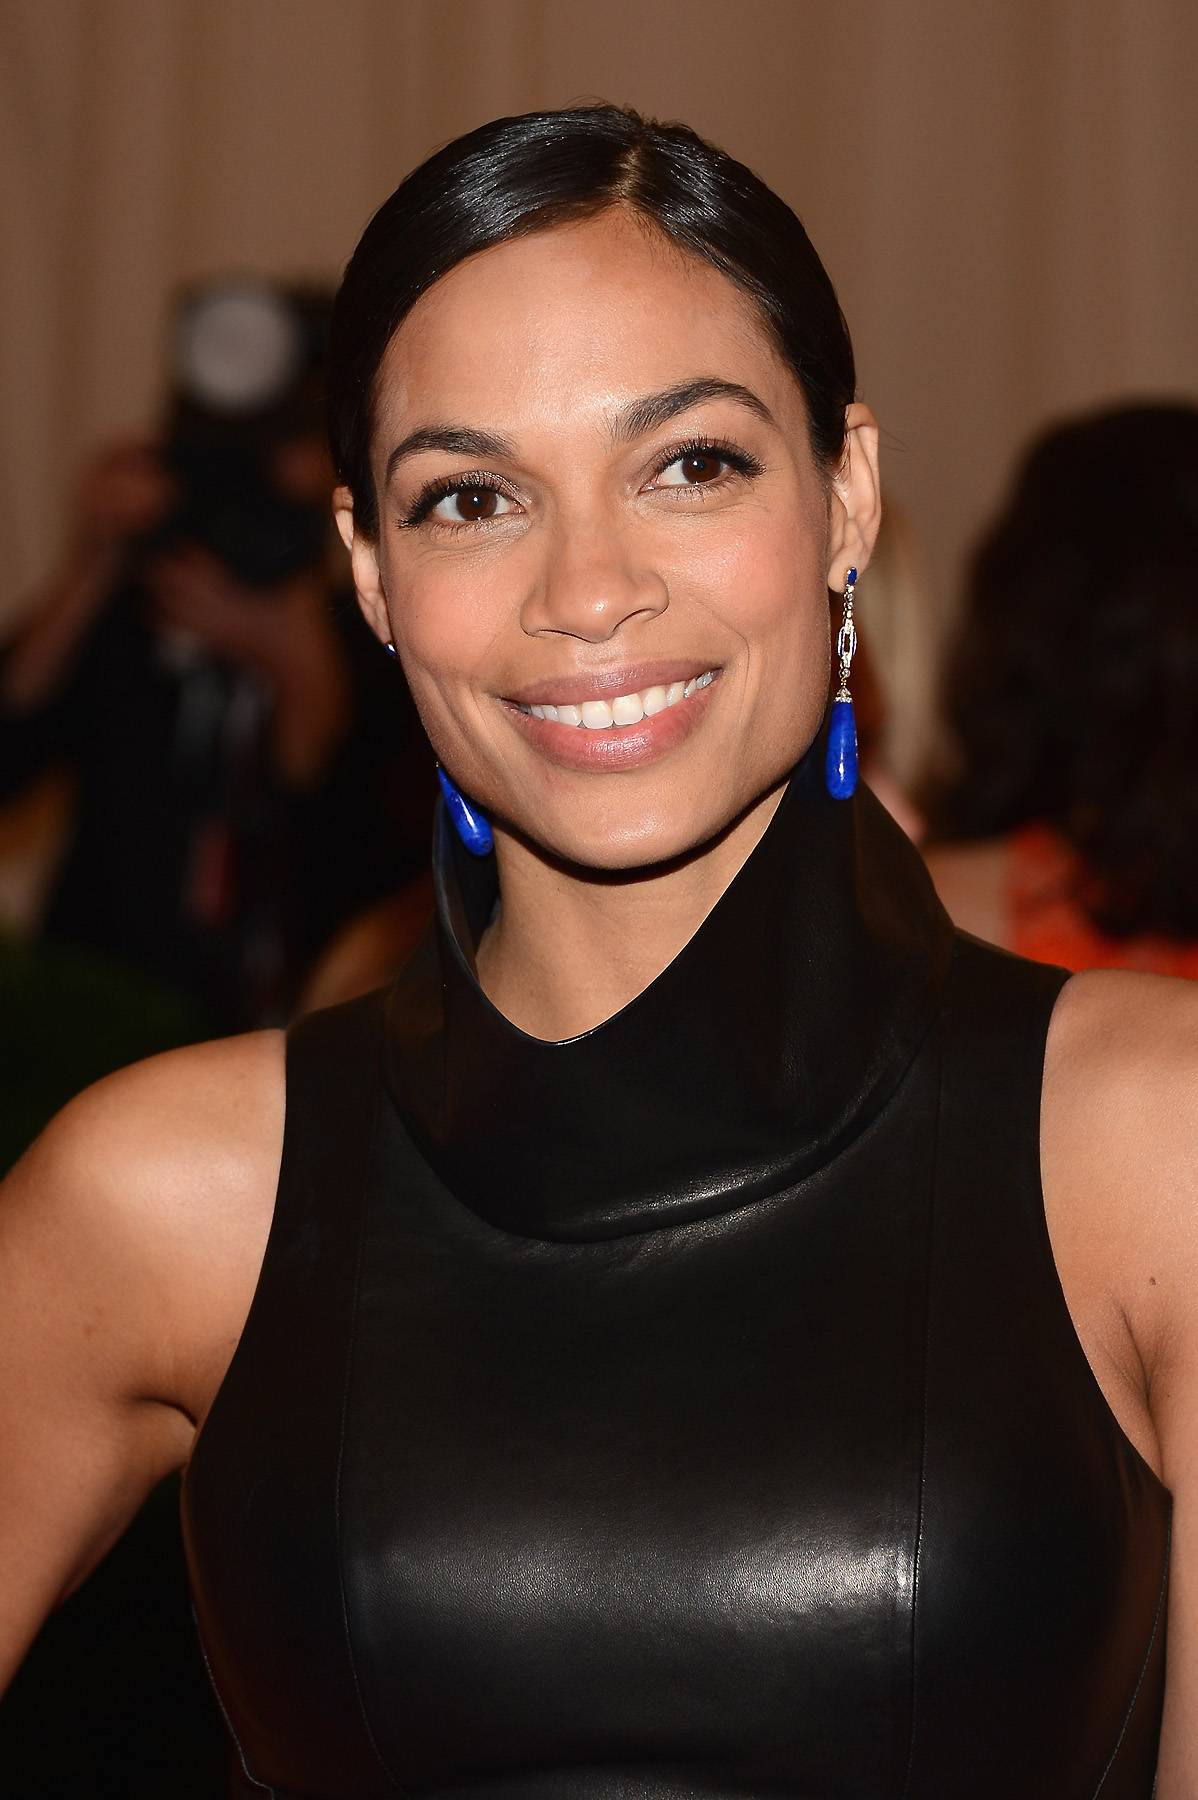 Rosario Dawson: May 9 - The gorgeous actress and activist turns 33. (Photo: Dimitrios Kambouris/Getty Images)